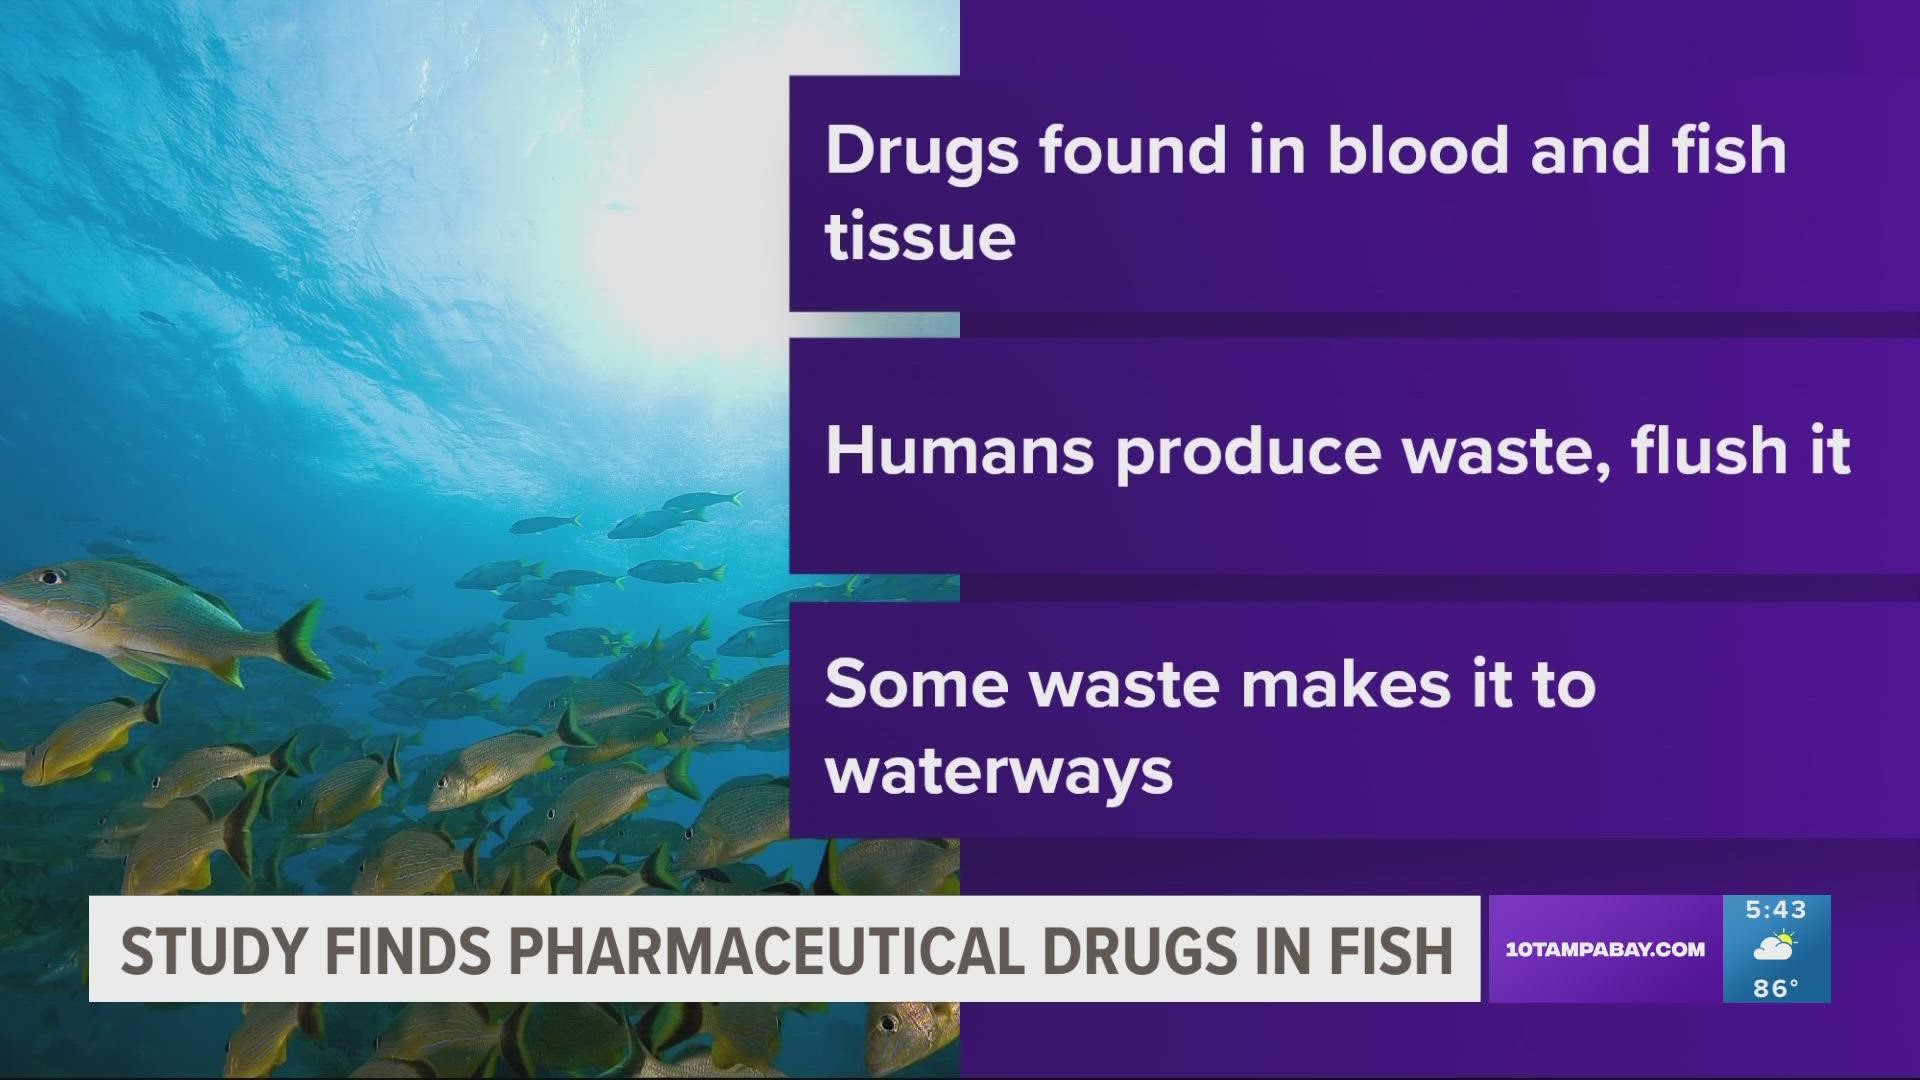 One fish was found to have 17 different kinds of drugs in its system.